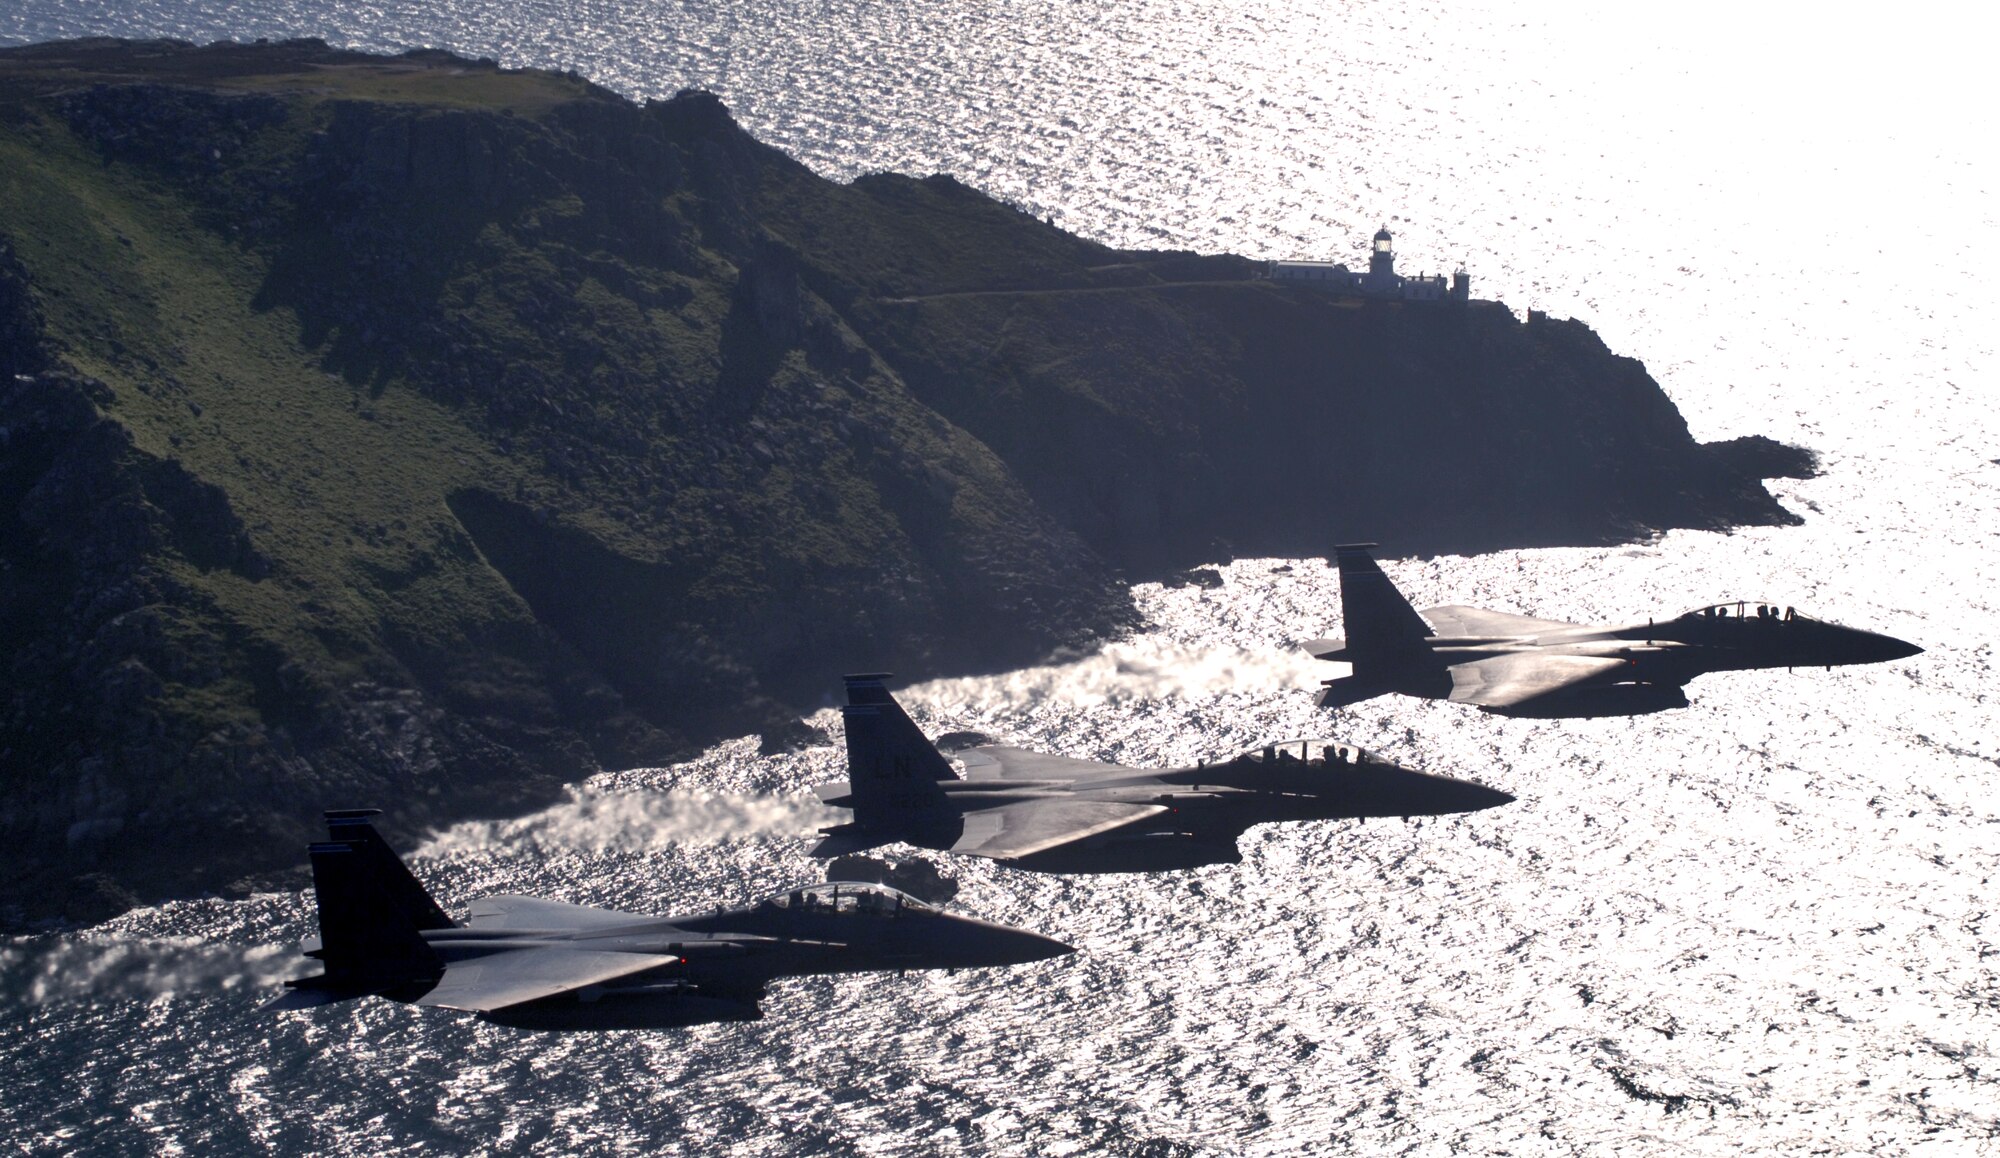 Three F-15E Strike Eagles from the 492nd Fighter Squadron at Royal Air Force Lakenheath, England, cruise at 300 mph along the southwestern English coast.  The aircrews were on the way to an area off the coast where they could practice basic surface attack techniques.  (U.S. Air Force photo/Master Sgt. Lance Cheung)